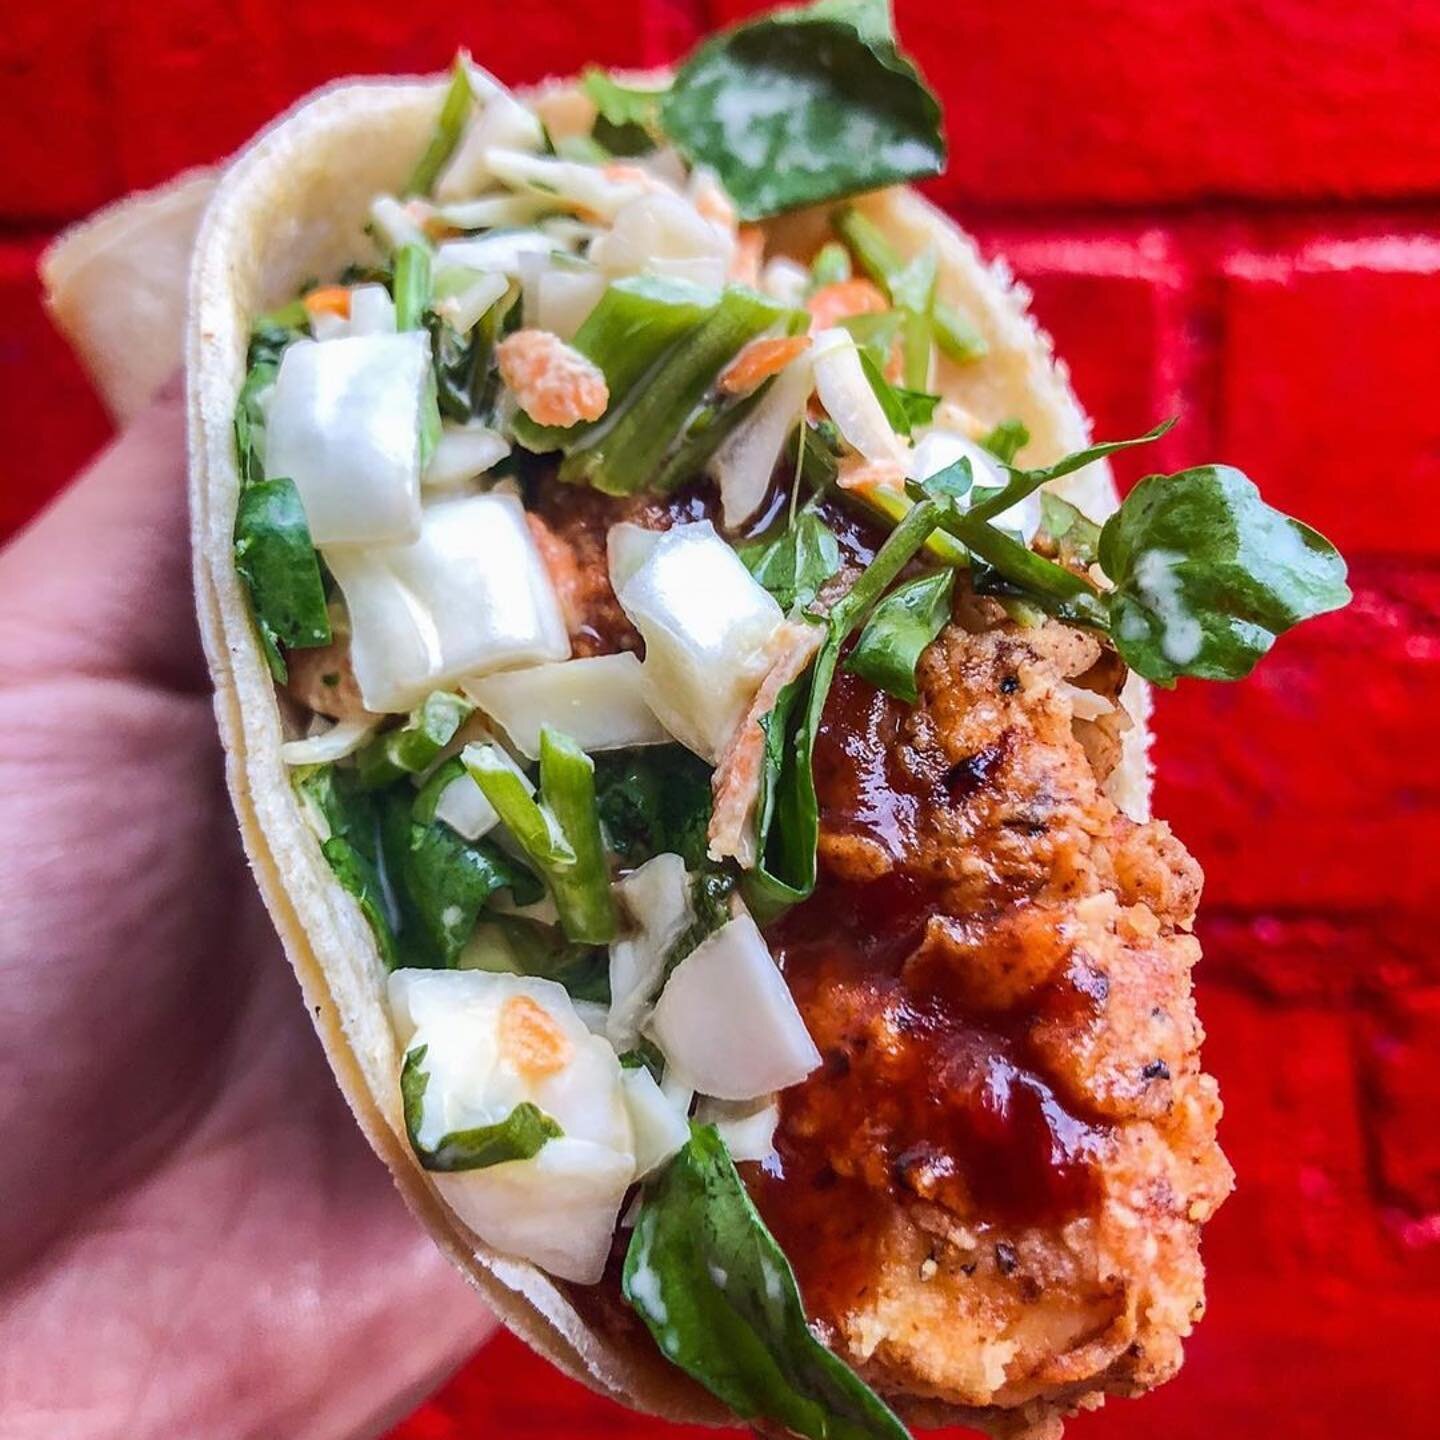 #Repost @tikitacodc with @make_repost
・・・
Two worlds collide: fried chicken 🍗 , meet the taco 🌮 . No, this is not a prank. Yes, you need to get it ASAP! Thank us when you get here 😉